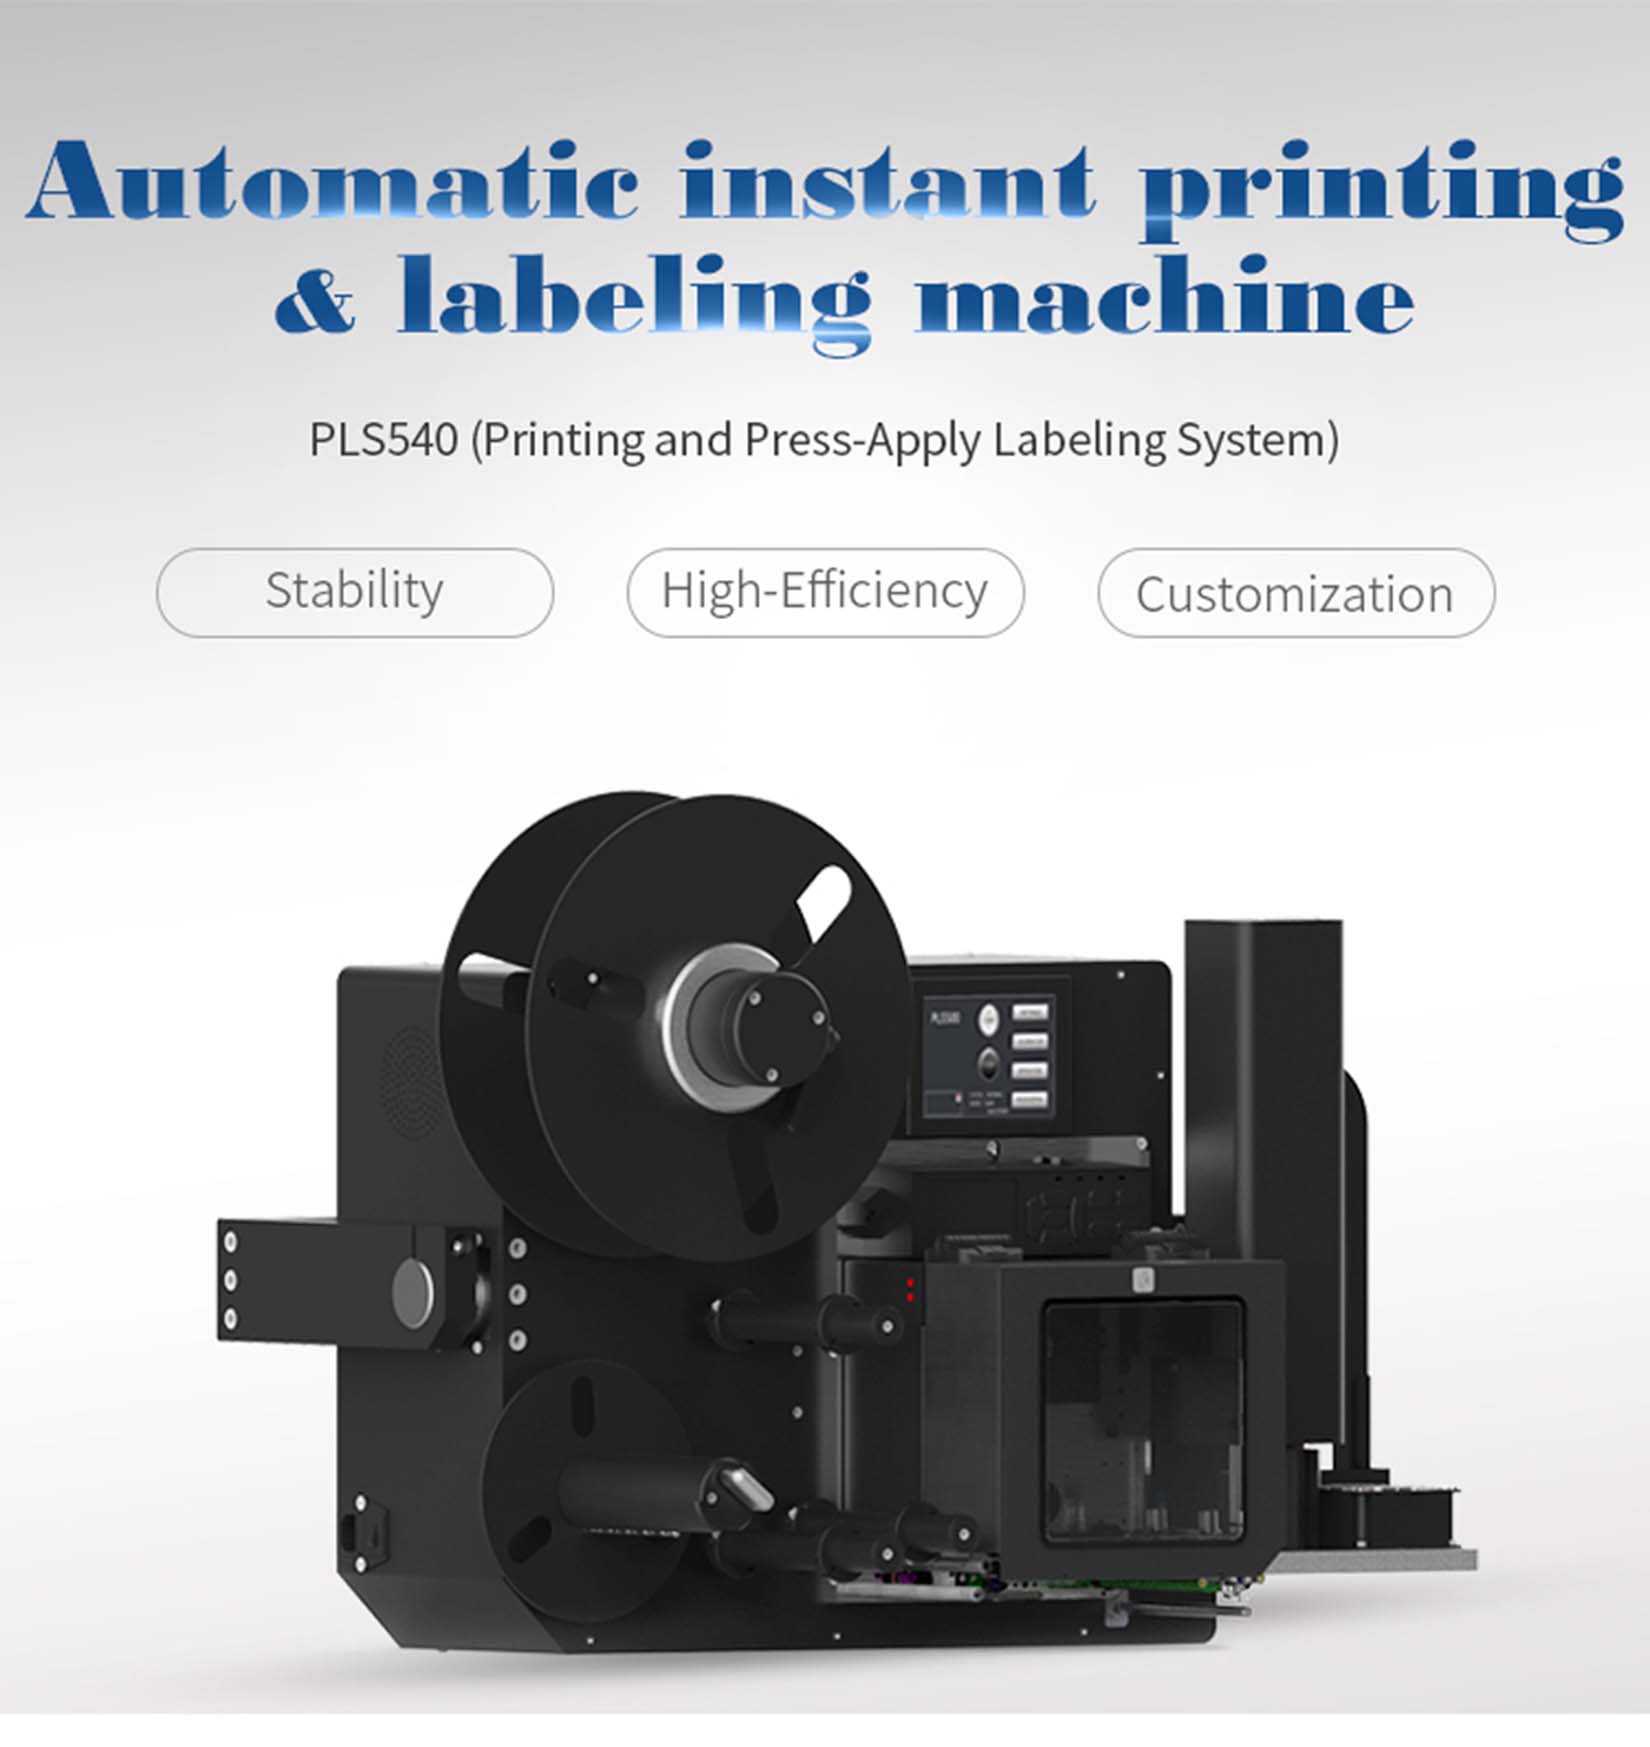 Print and Press-Apply Labeling System PLS540